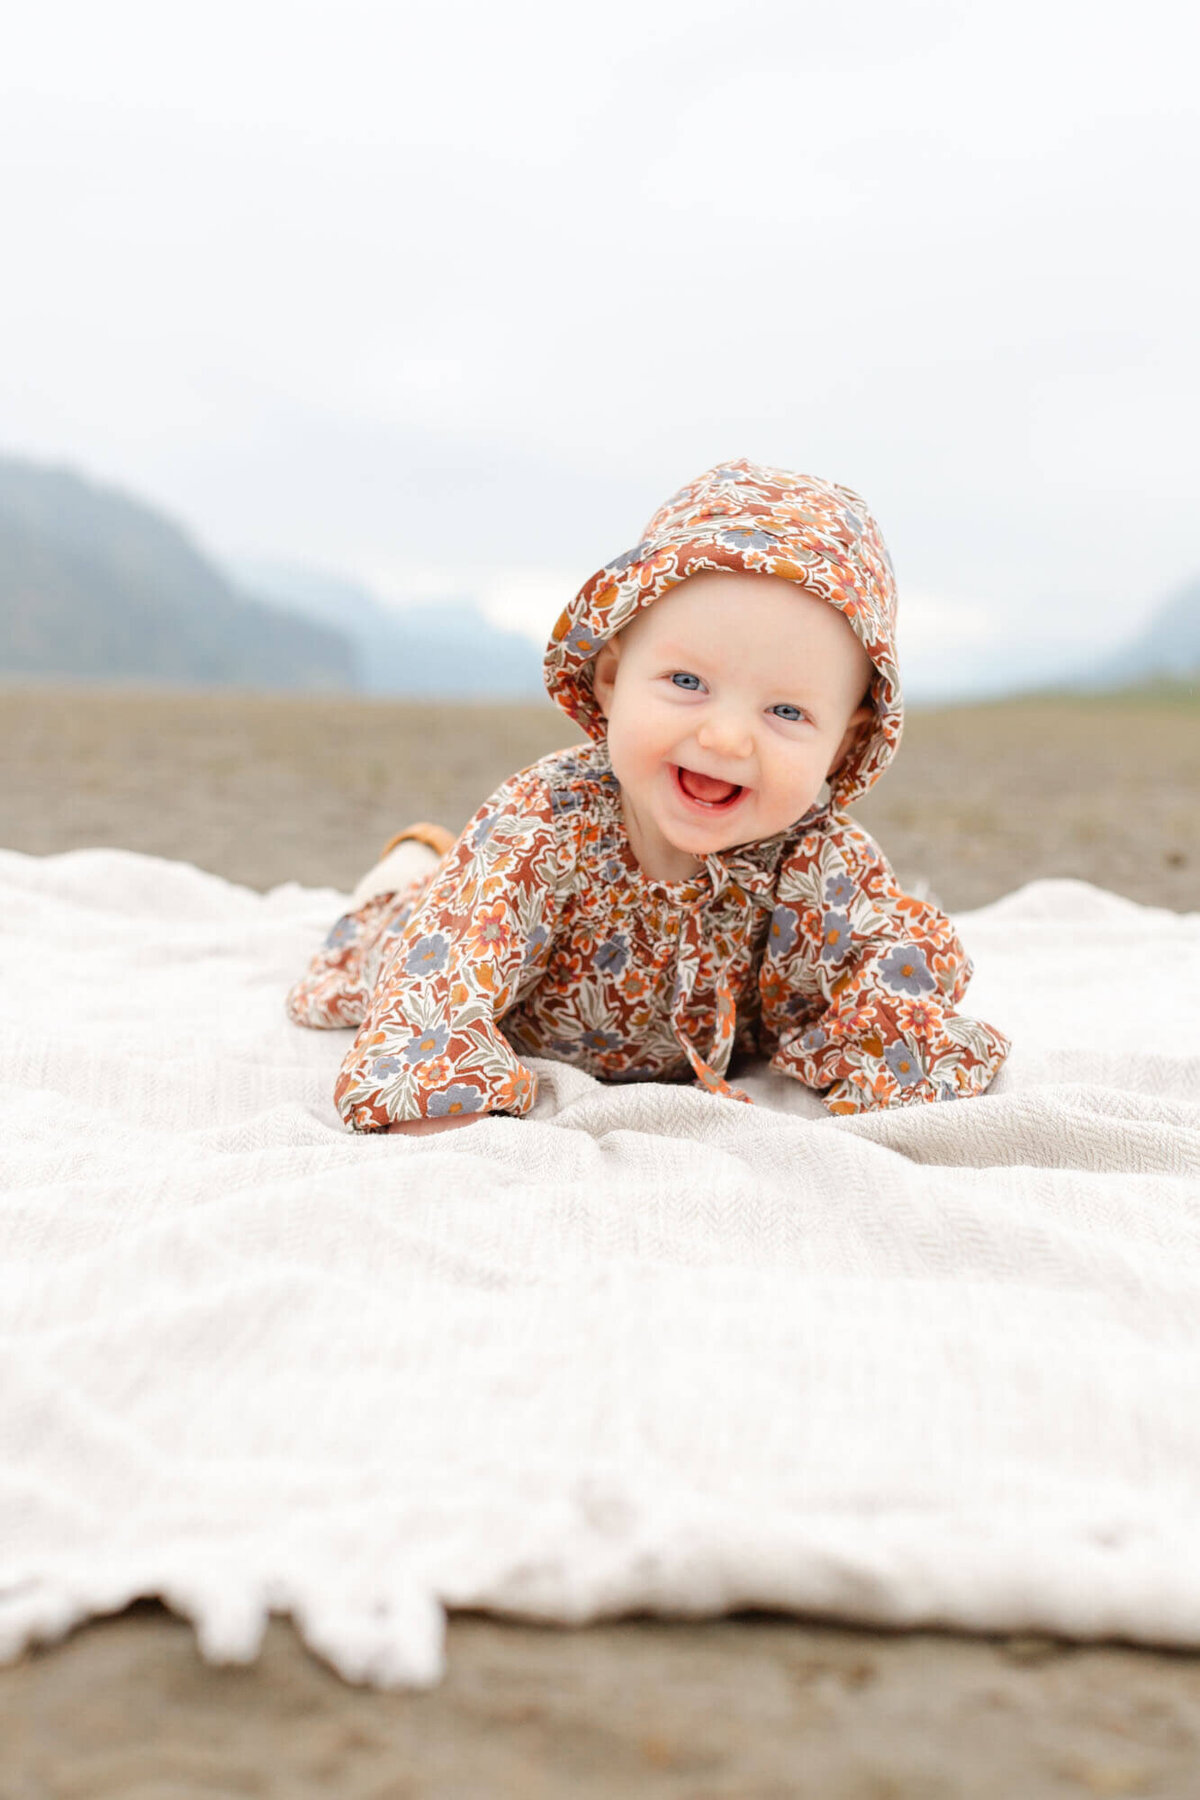 6 month old baby girl in floral romper laying on a cream blanket in the sand with mountain views behind her. She is at Rooster Rock State Park for her milestone photo session in the Columbia River Gorge.